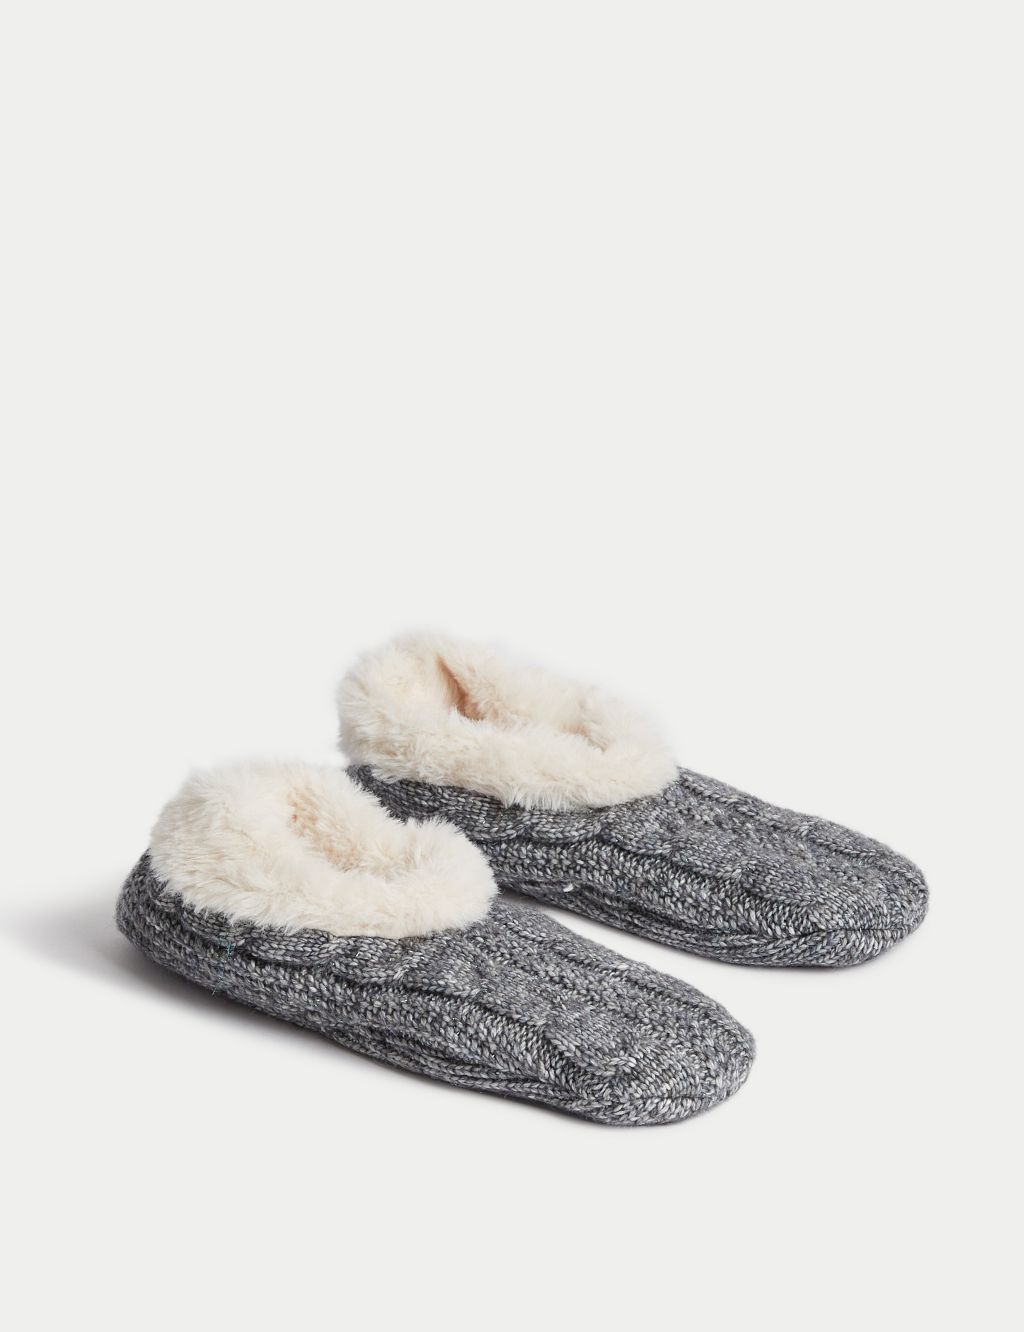 Recycled Faux Fur Cable Knit Slipper Socks image 1